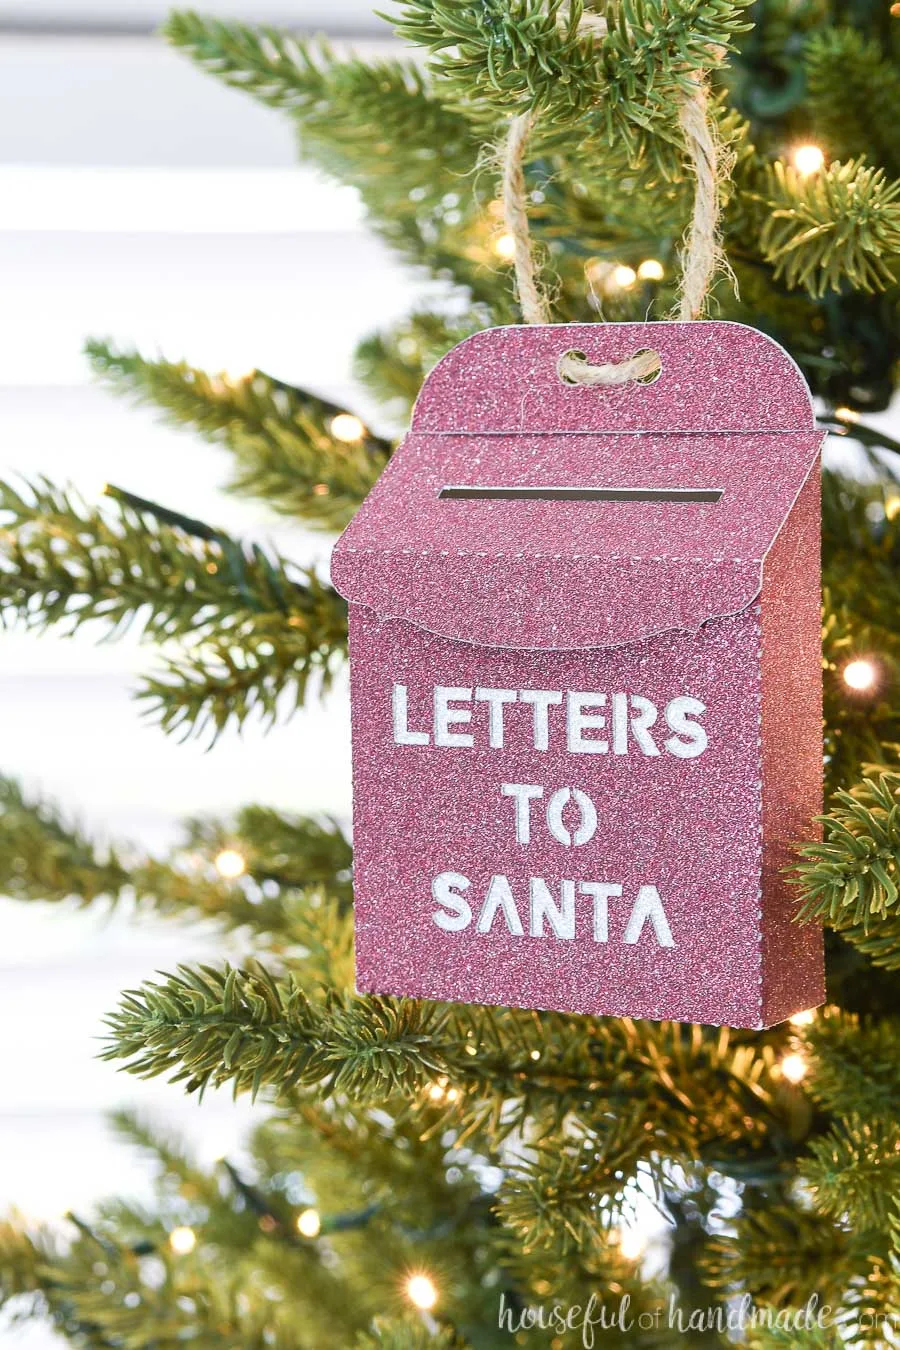 Mailbox with letters from children for Santa Claus. Classic